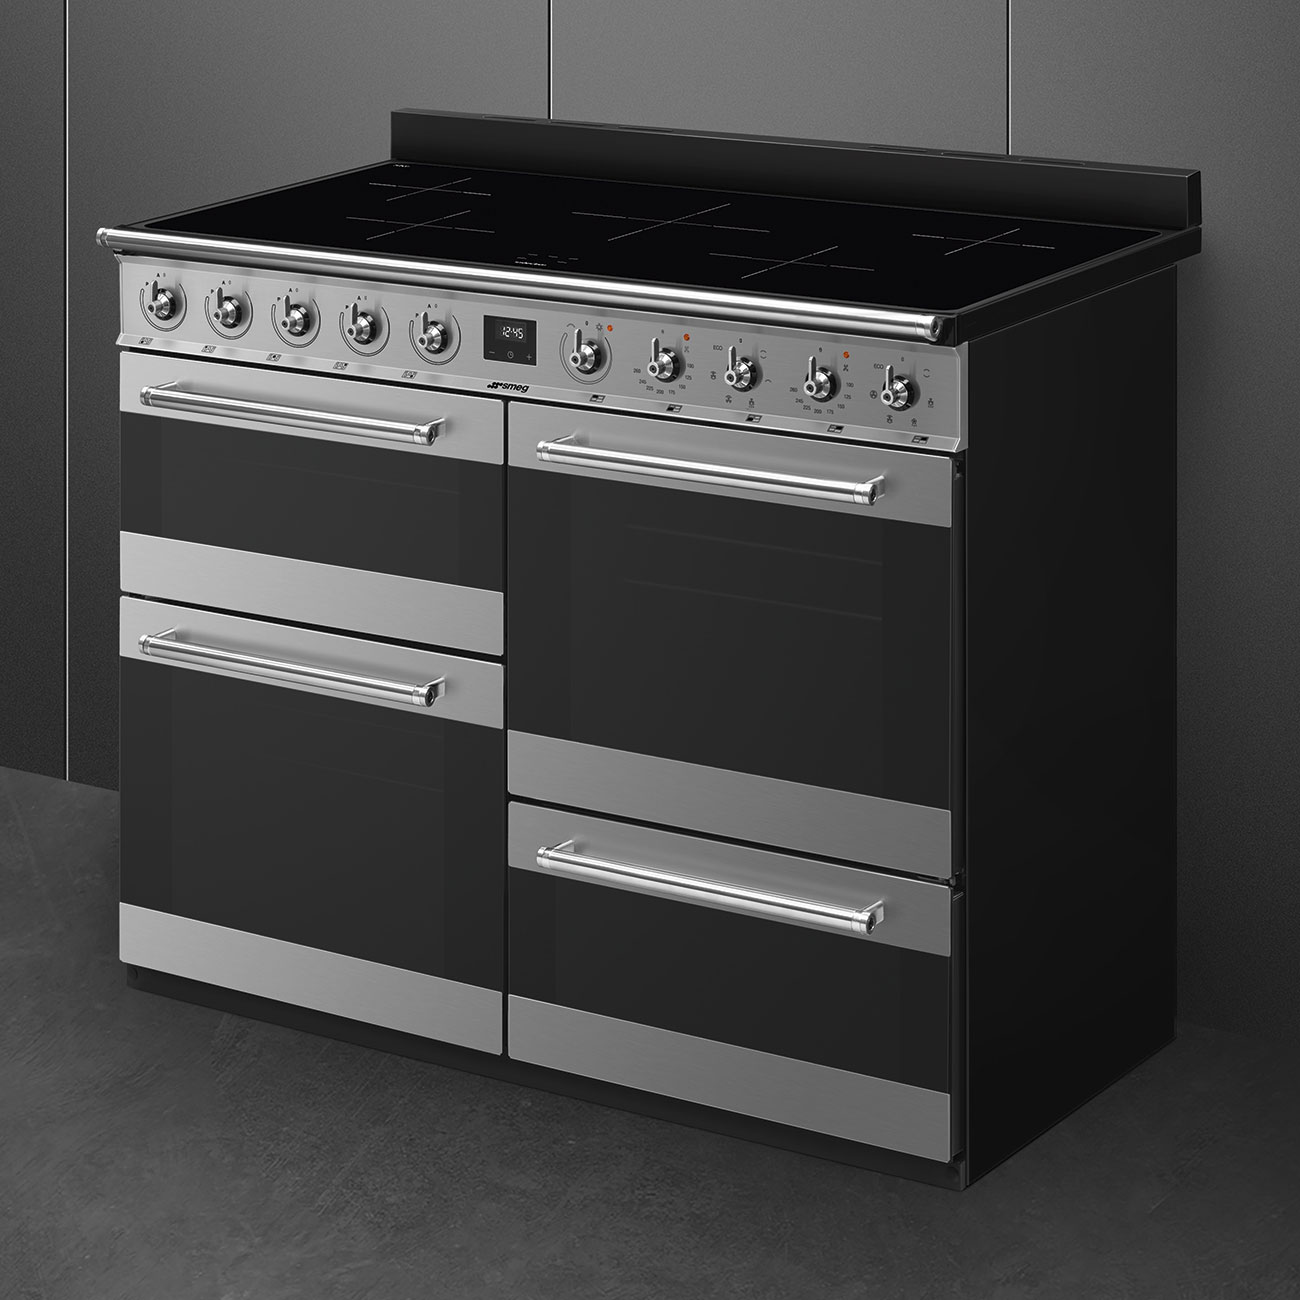 Smeg Stainless steel Cooker with Induction Hob_3